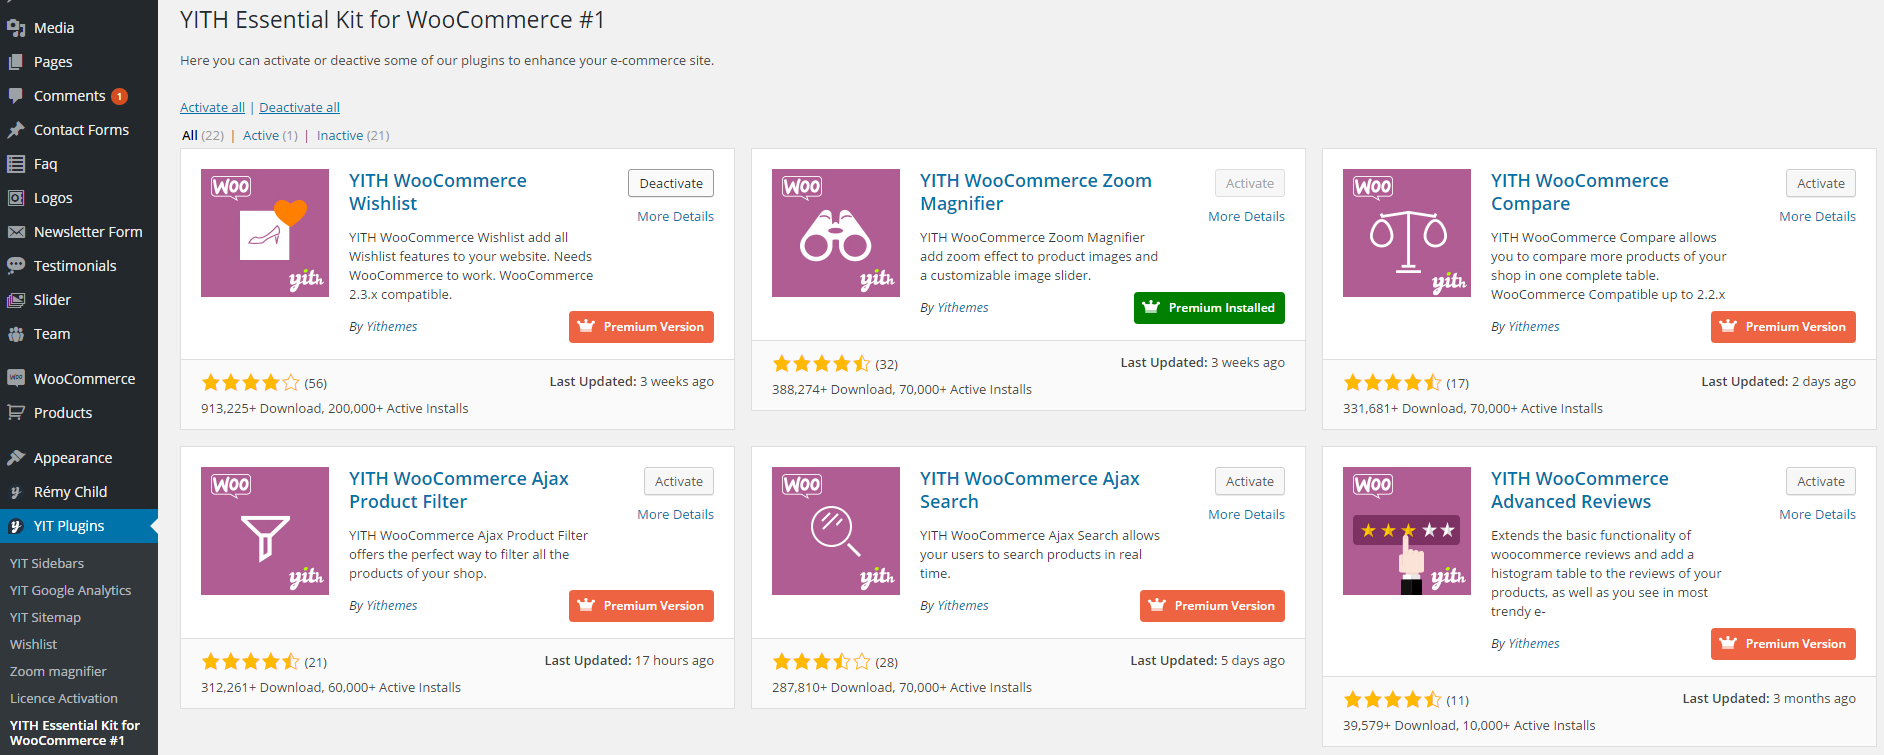 YITH Essential Kit for WooCommerce #1 Download Free Wordpress Plugin 1